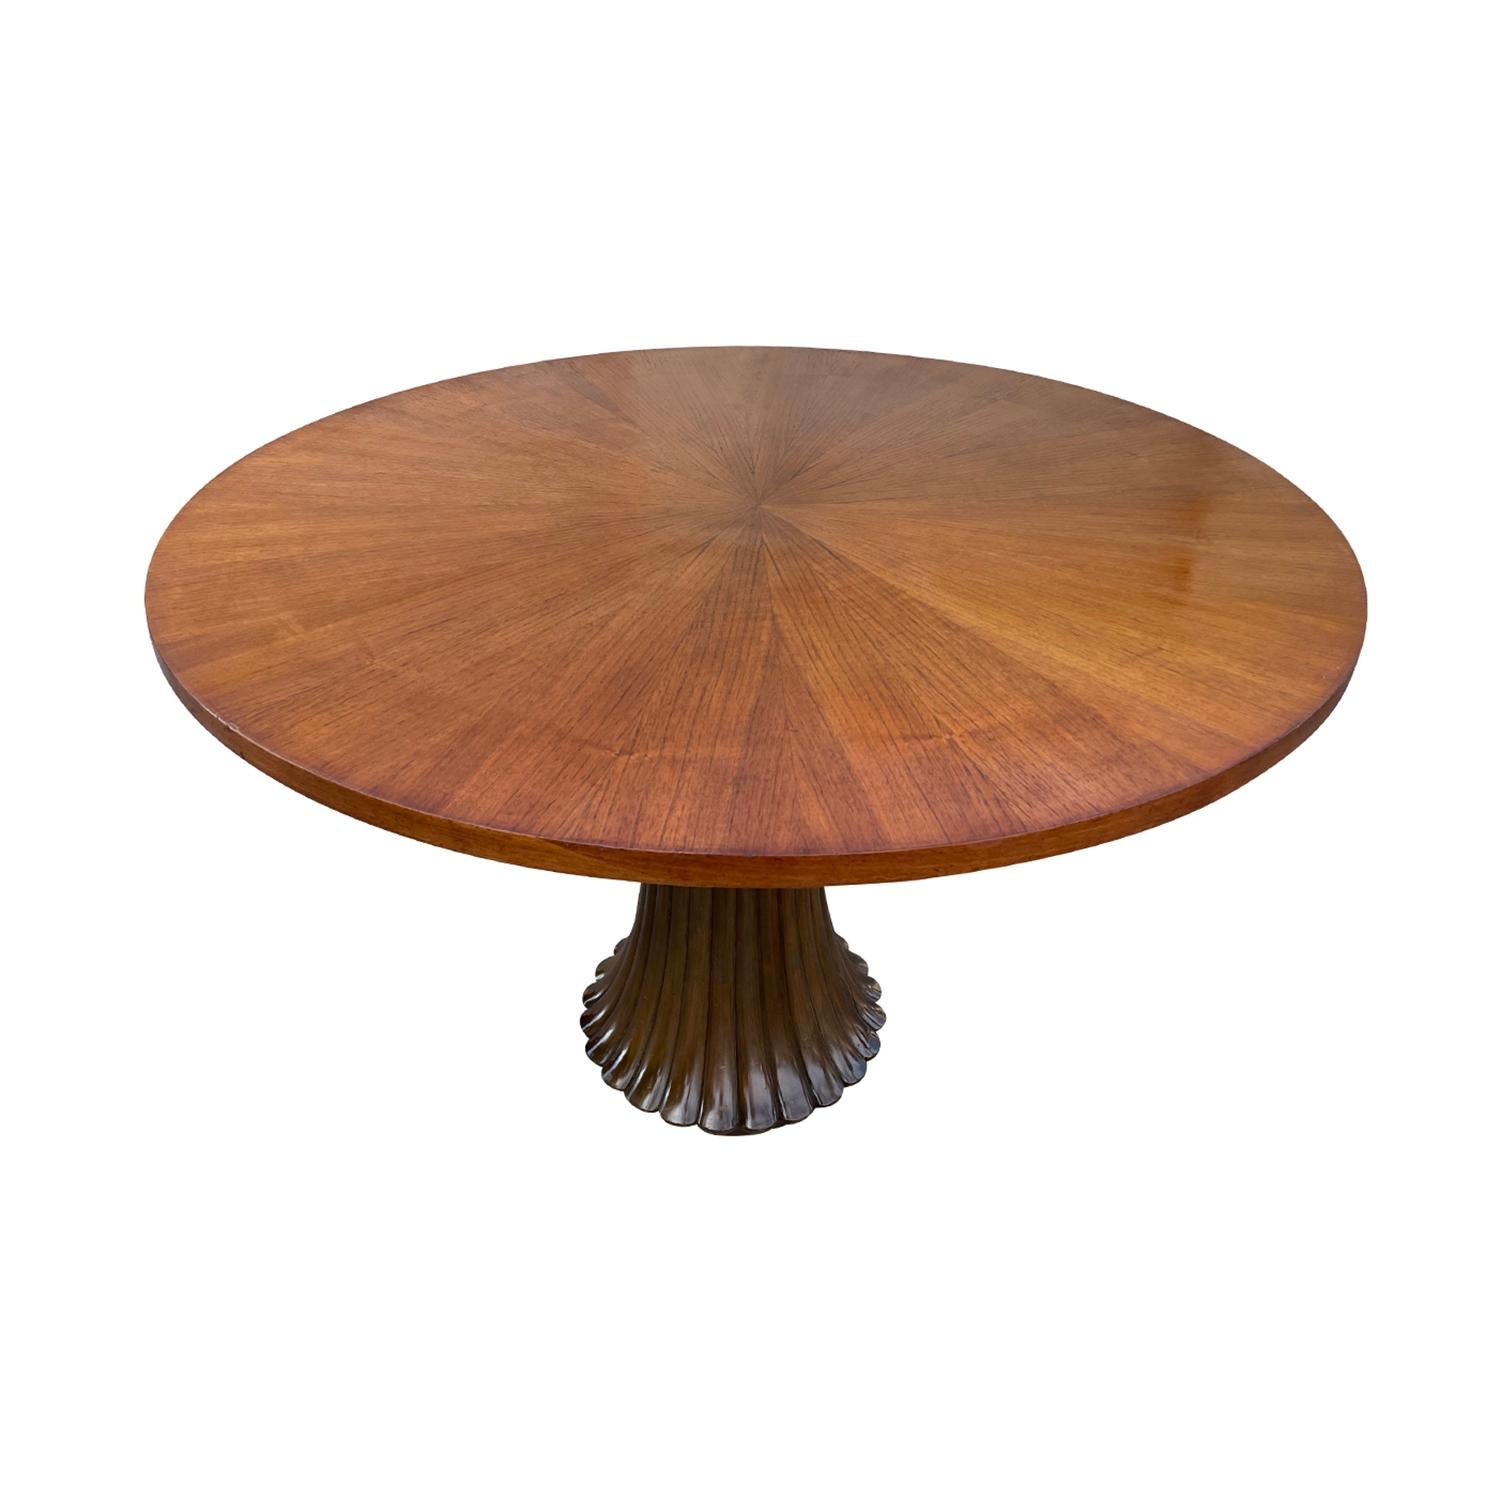 Polished 20th Century Italian Round Vintage Rosewood, Walnut Dining Room Table For Sale